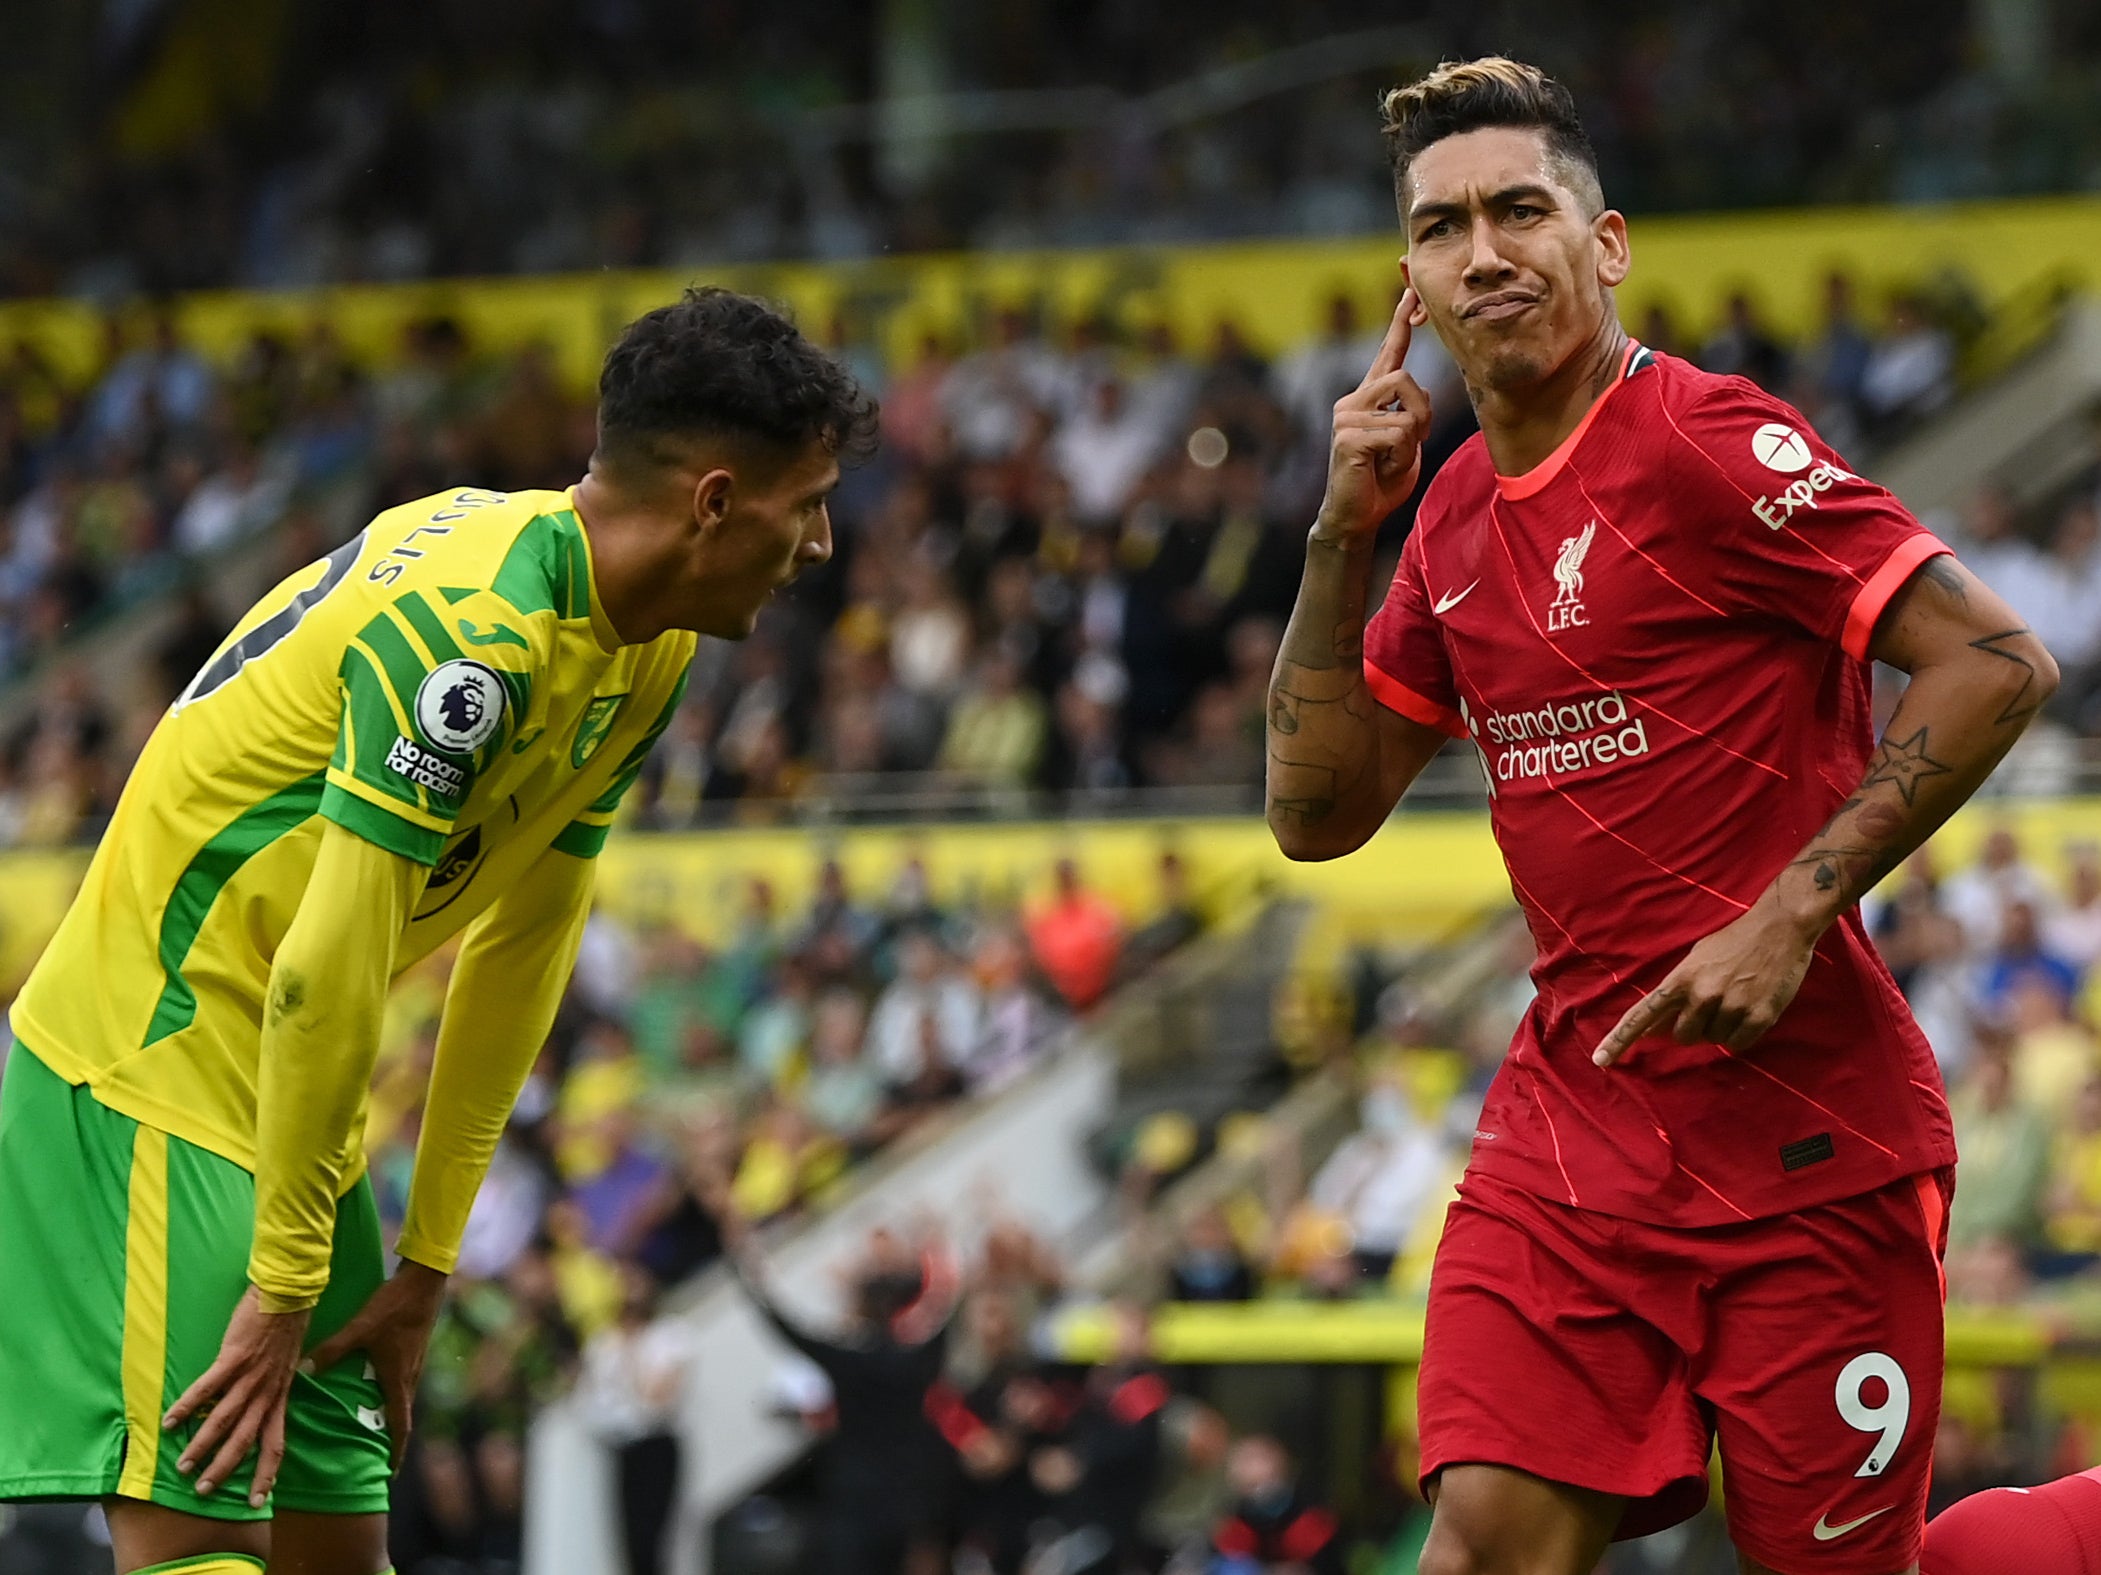 Liverpool’s Roberto Firmino wheels away after scoring his side’s second goal at Carrow Road